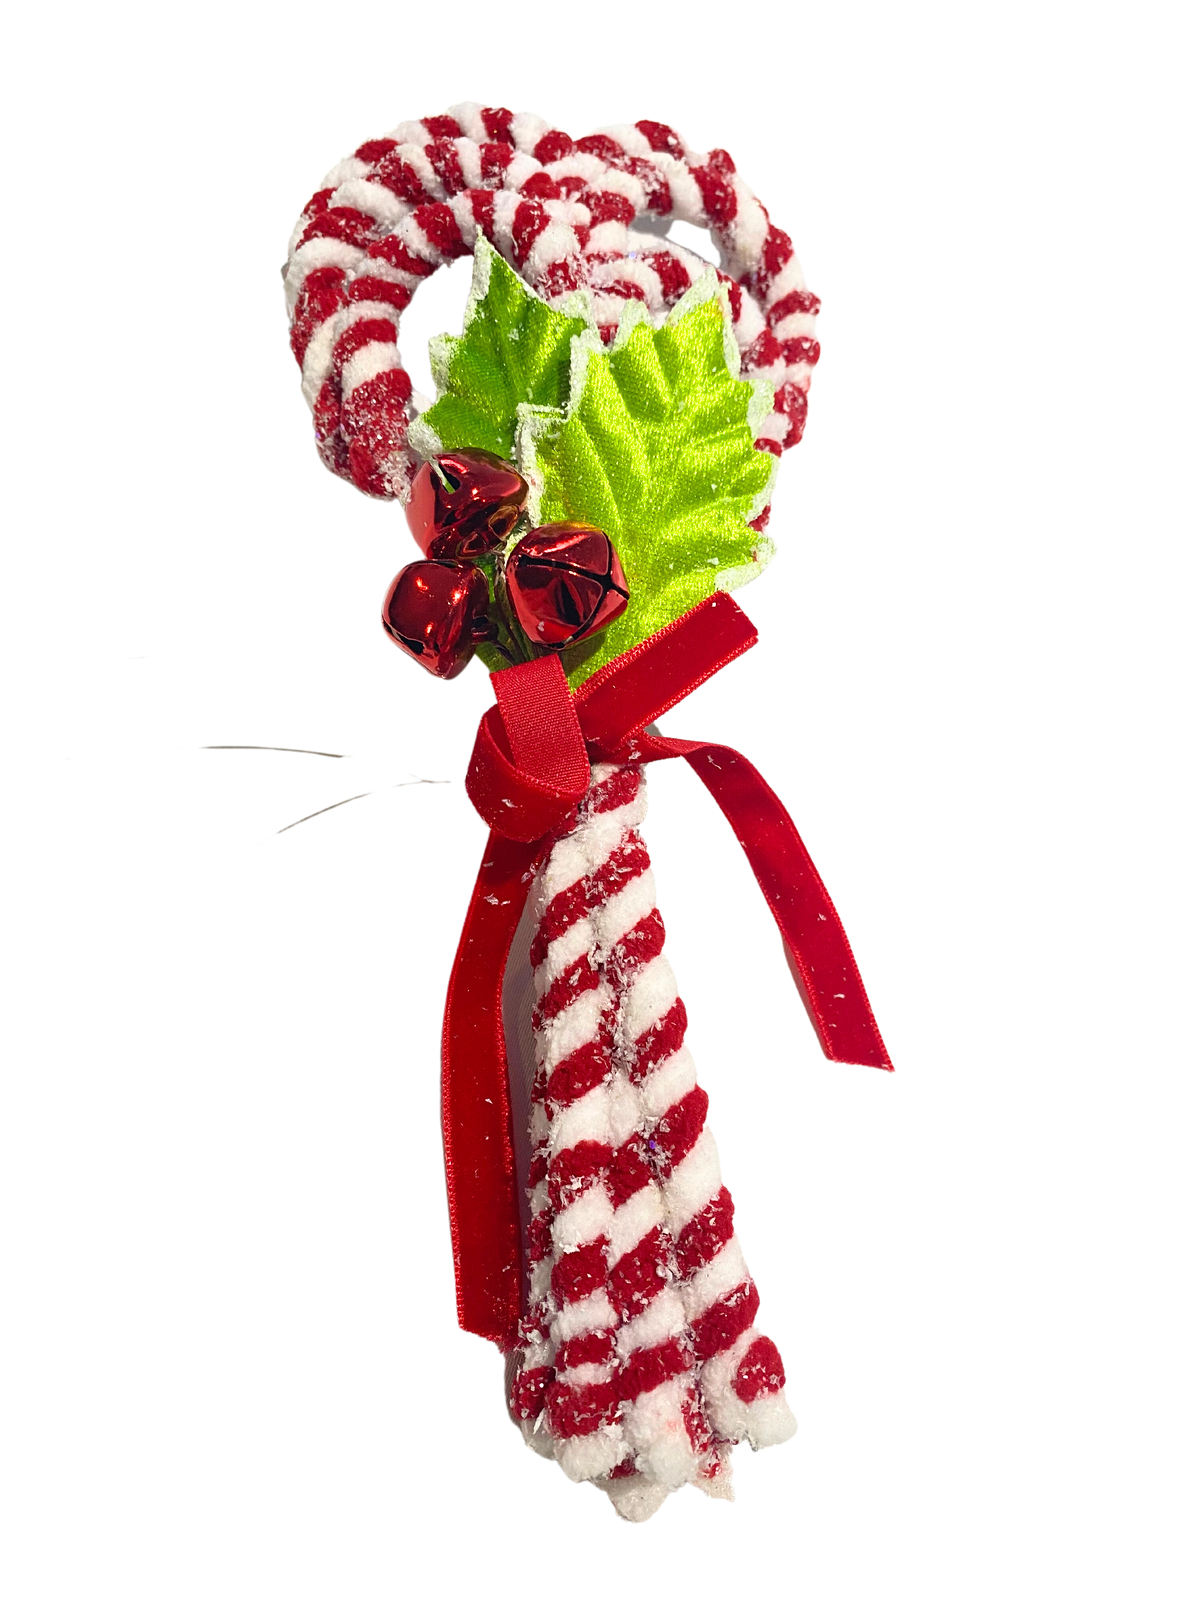 Candy Cane and Holly Bundle Ornament